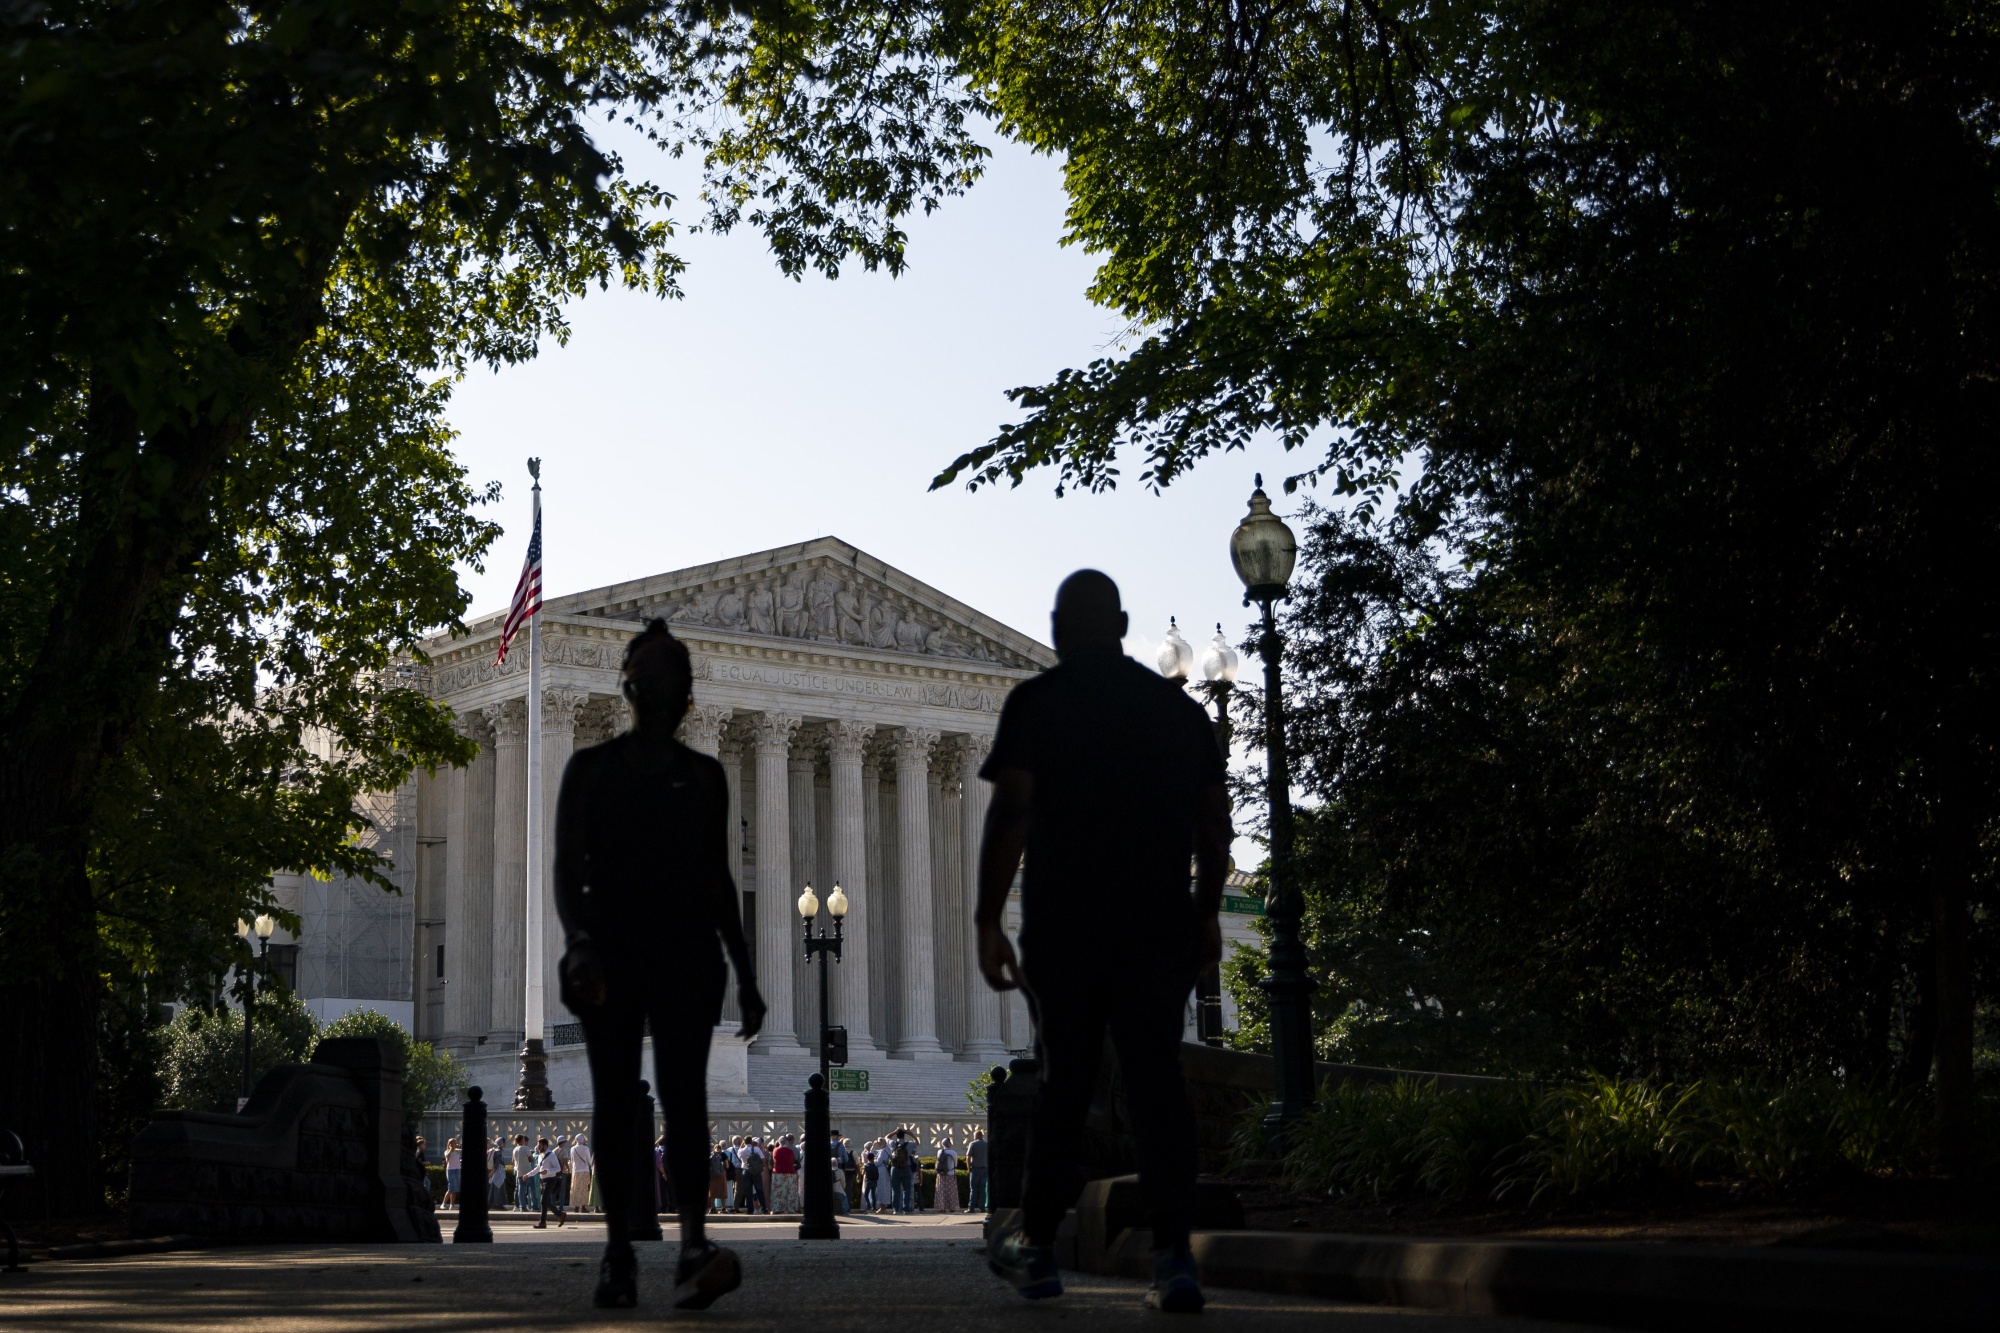 The justices in a unanimous decision said that under a federal job-discrimination law, employers may have to bear some costs to accommodate the religious needs of workers.